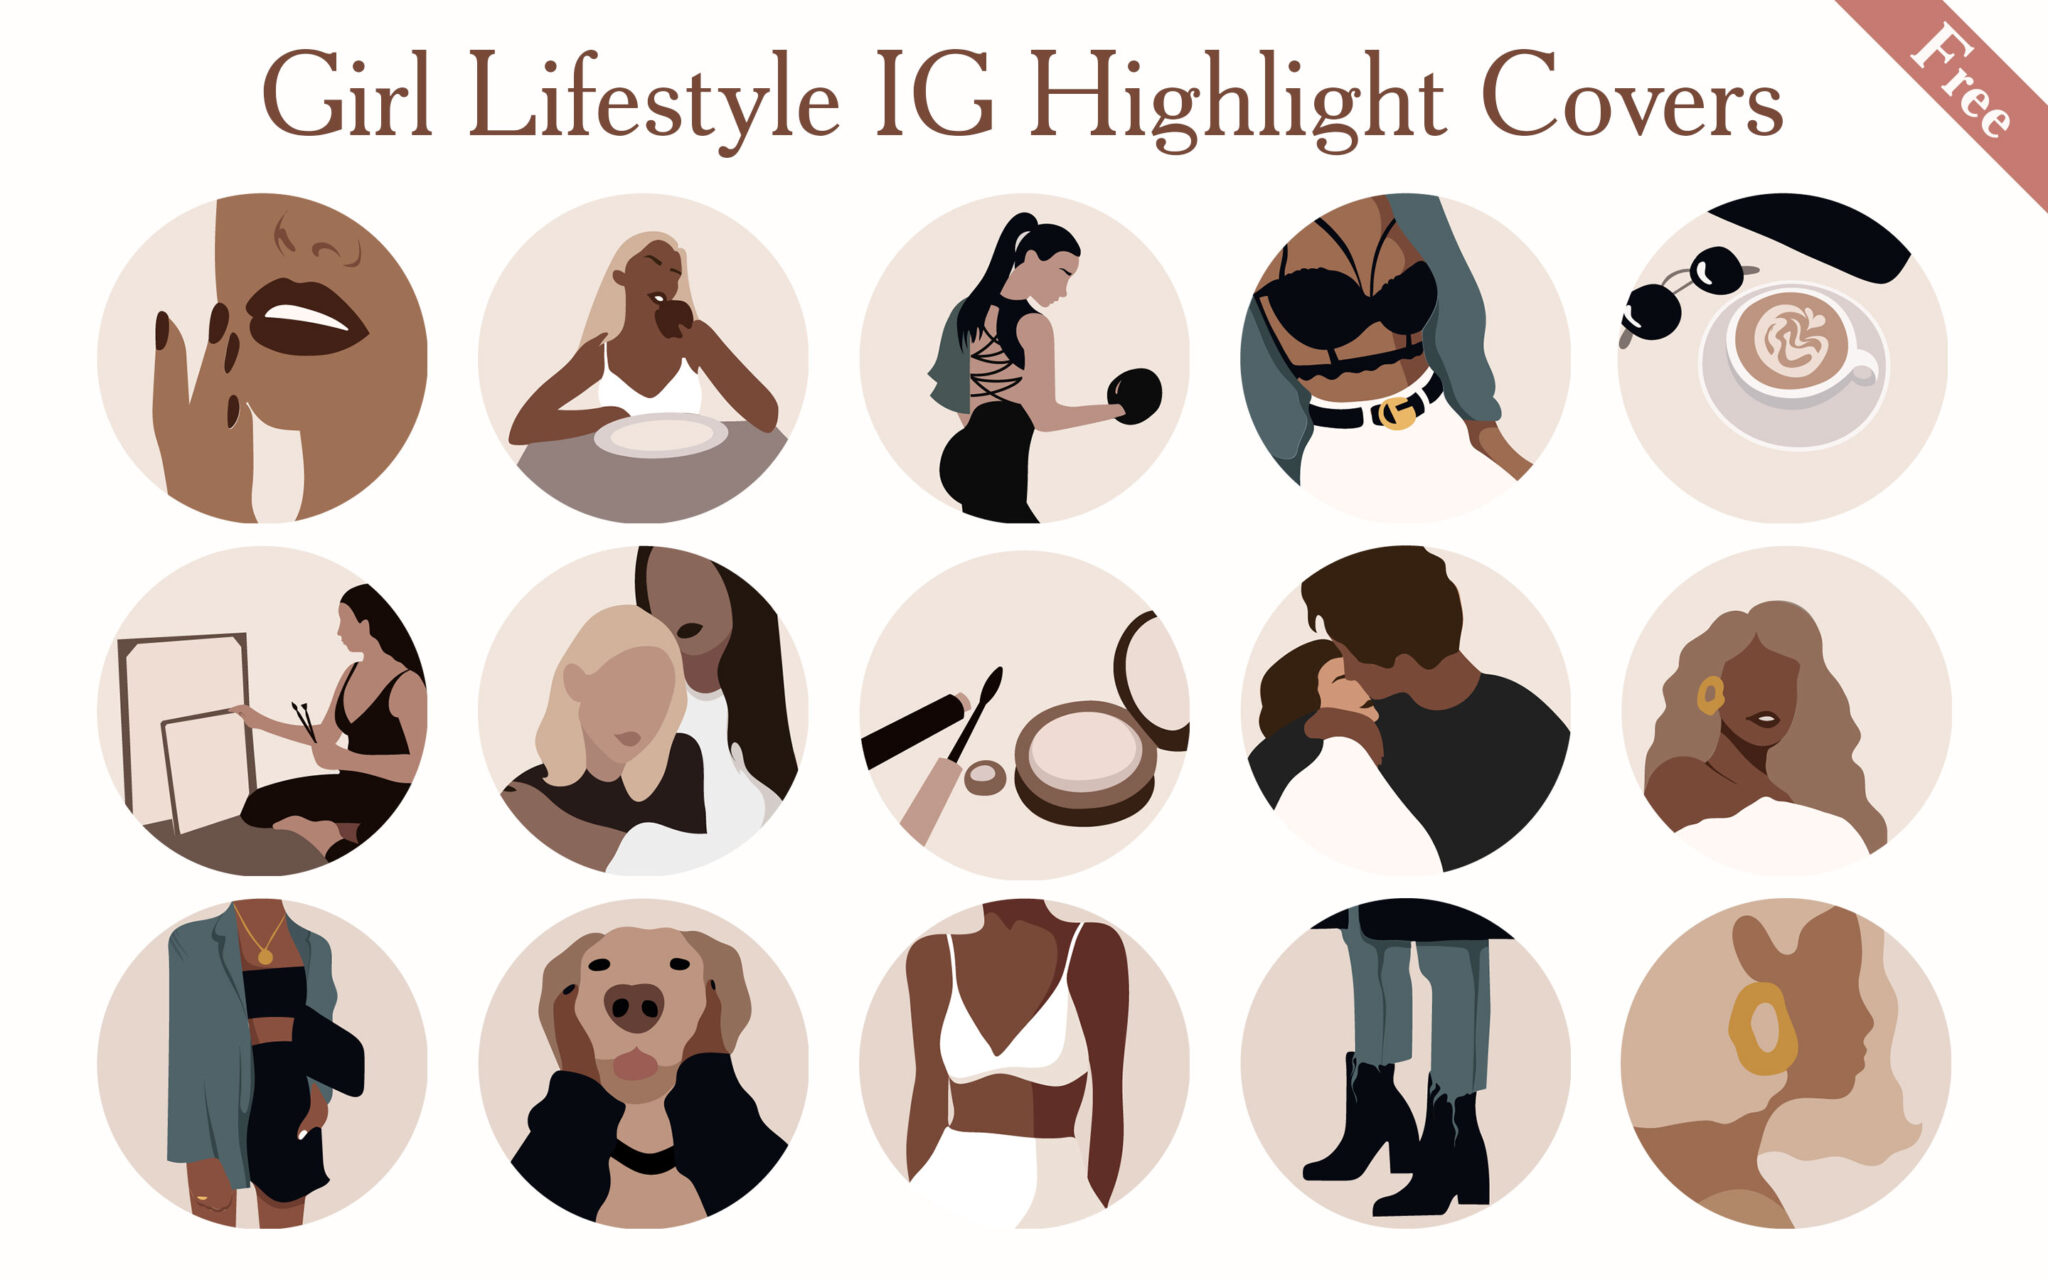 Beige Girl Lifestyle Instagram Highlight Covers - IG Highlight Covers Free